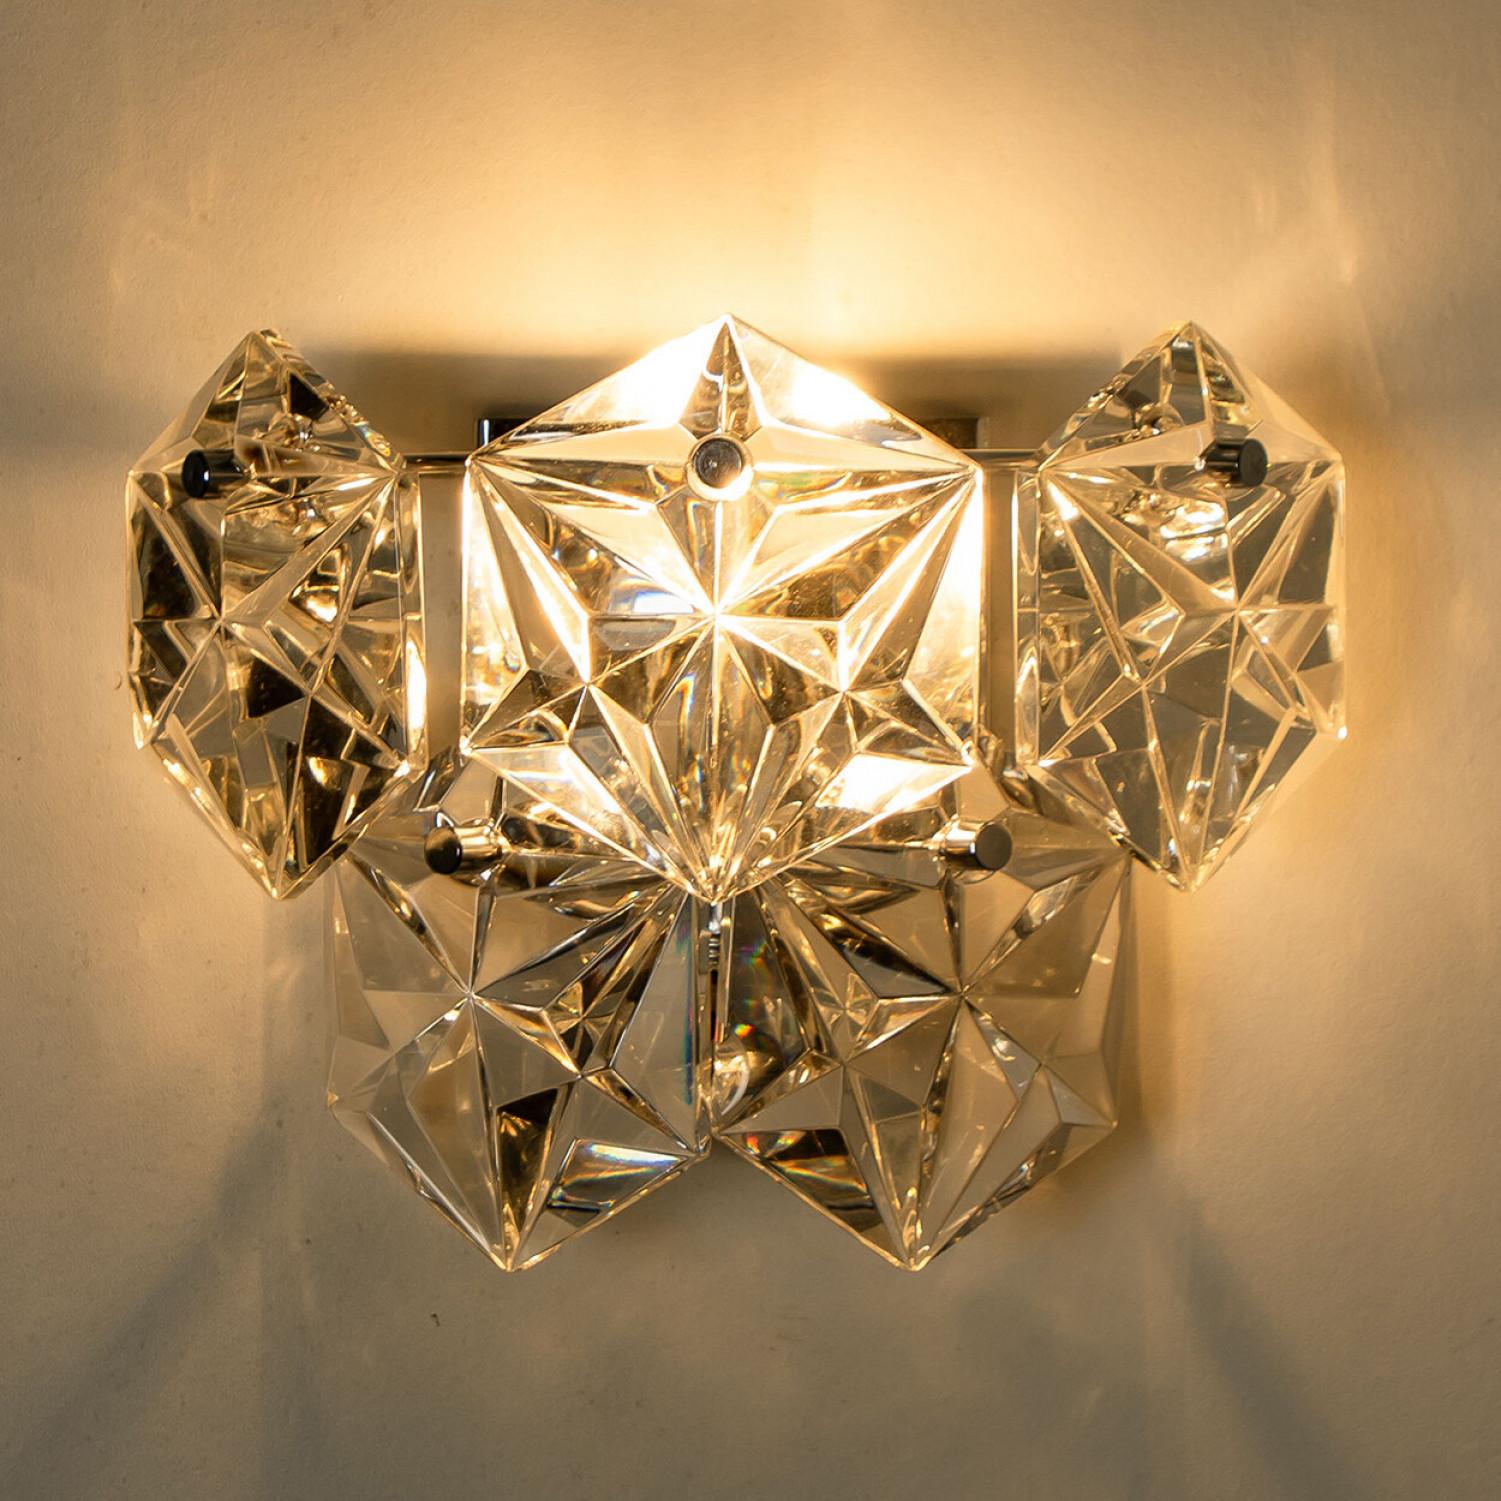 1 of the 2 Faceted Crystal and Silver Chrome Sconces by Kinkeldey, Germany, 1970 For Sale 8